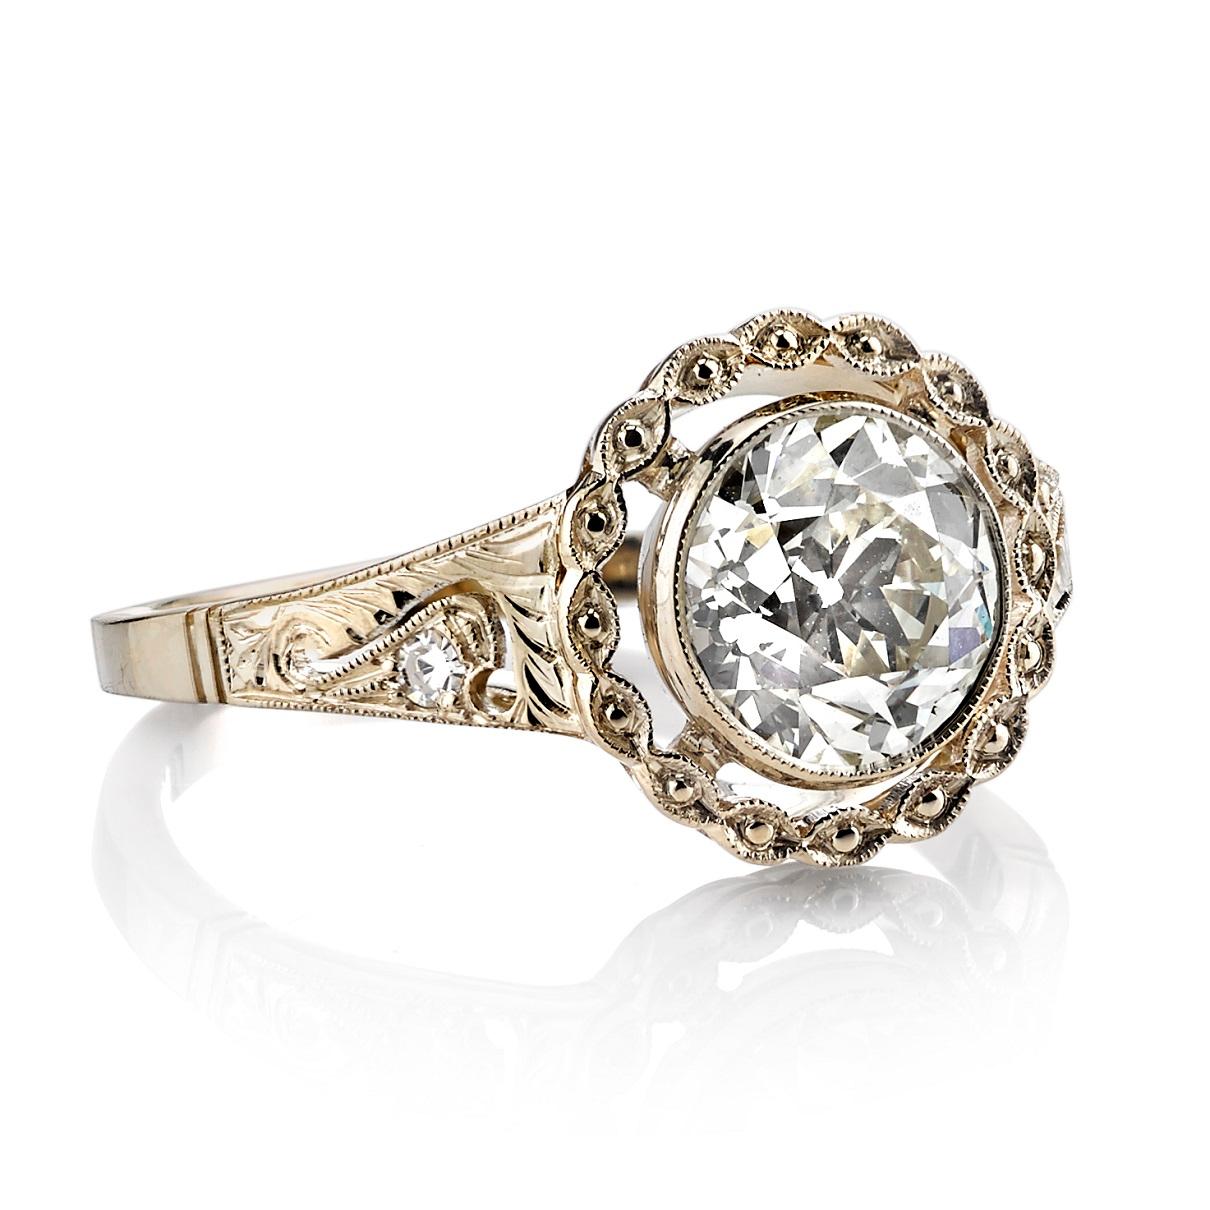 1.40ctw R-S/VS old Mine cut diamond with with 0.03ctw single cut accent stones set in an 18k champagne gold mounting. 

Ring is currently a size 6 and can be sized to fit.